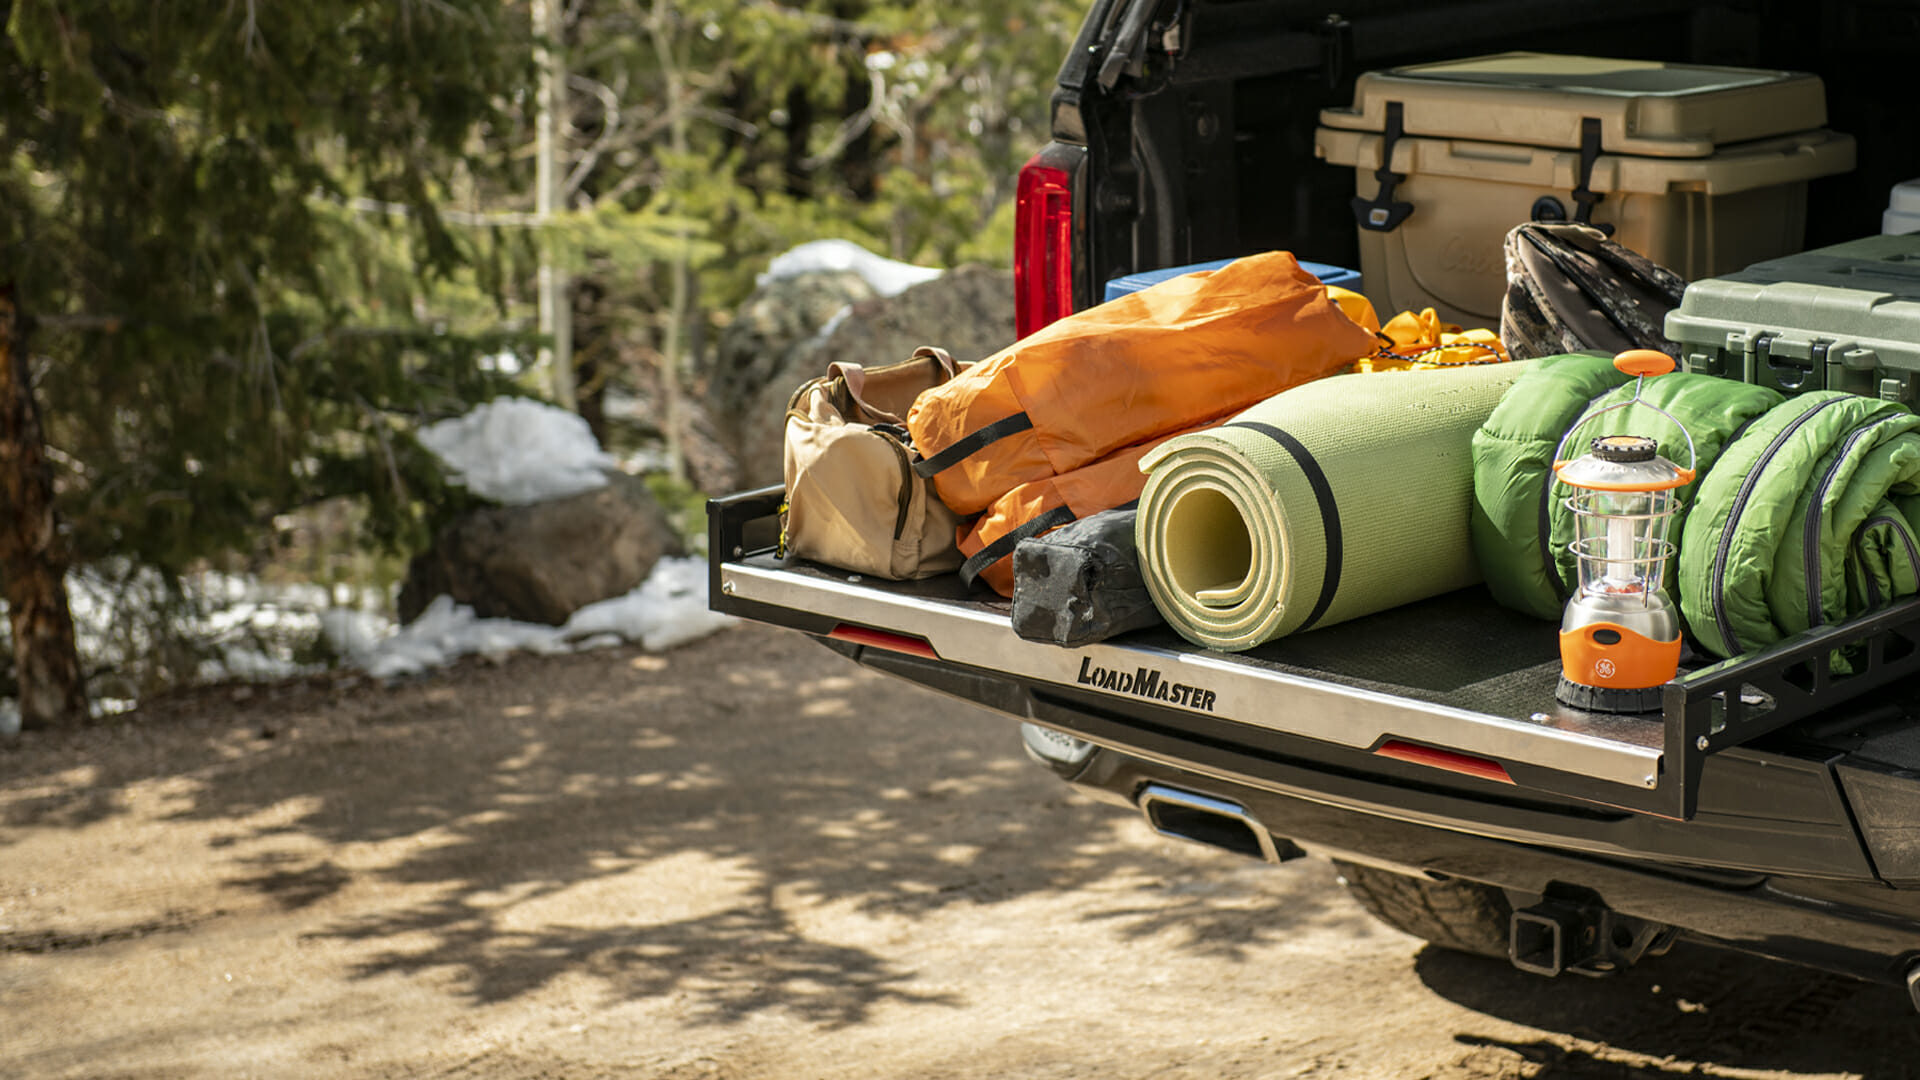 Loadmaster Utility Tray in a black pick up truck containing a lantern, sleeping bag, mat, boxes, foldable chairs, a backpack, and other camping supplies on a dirt road in a snowy forest